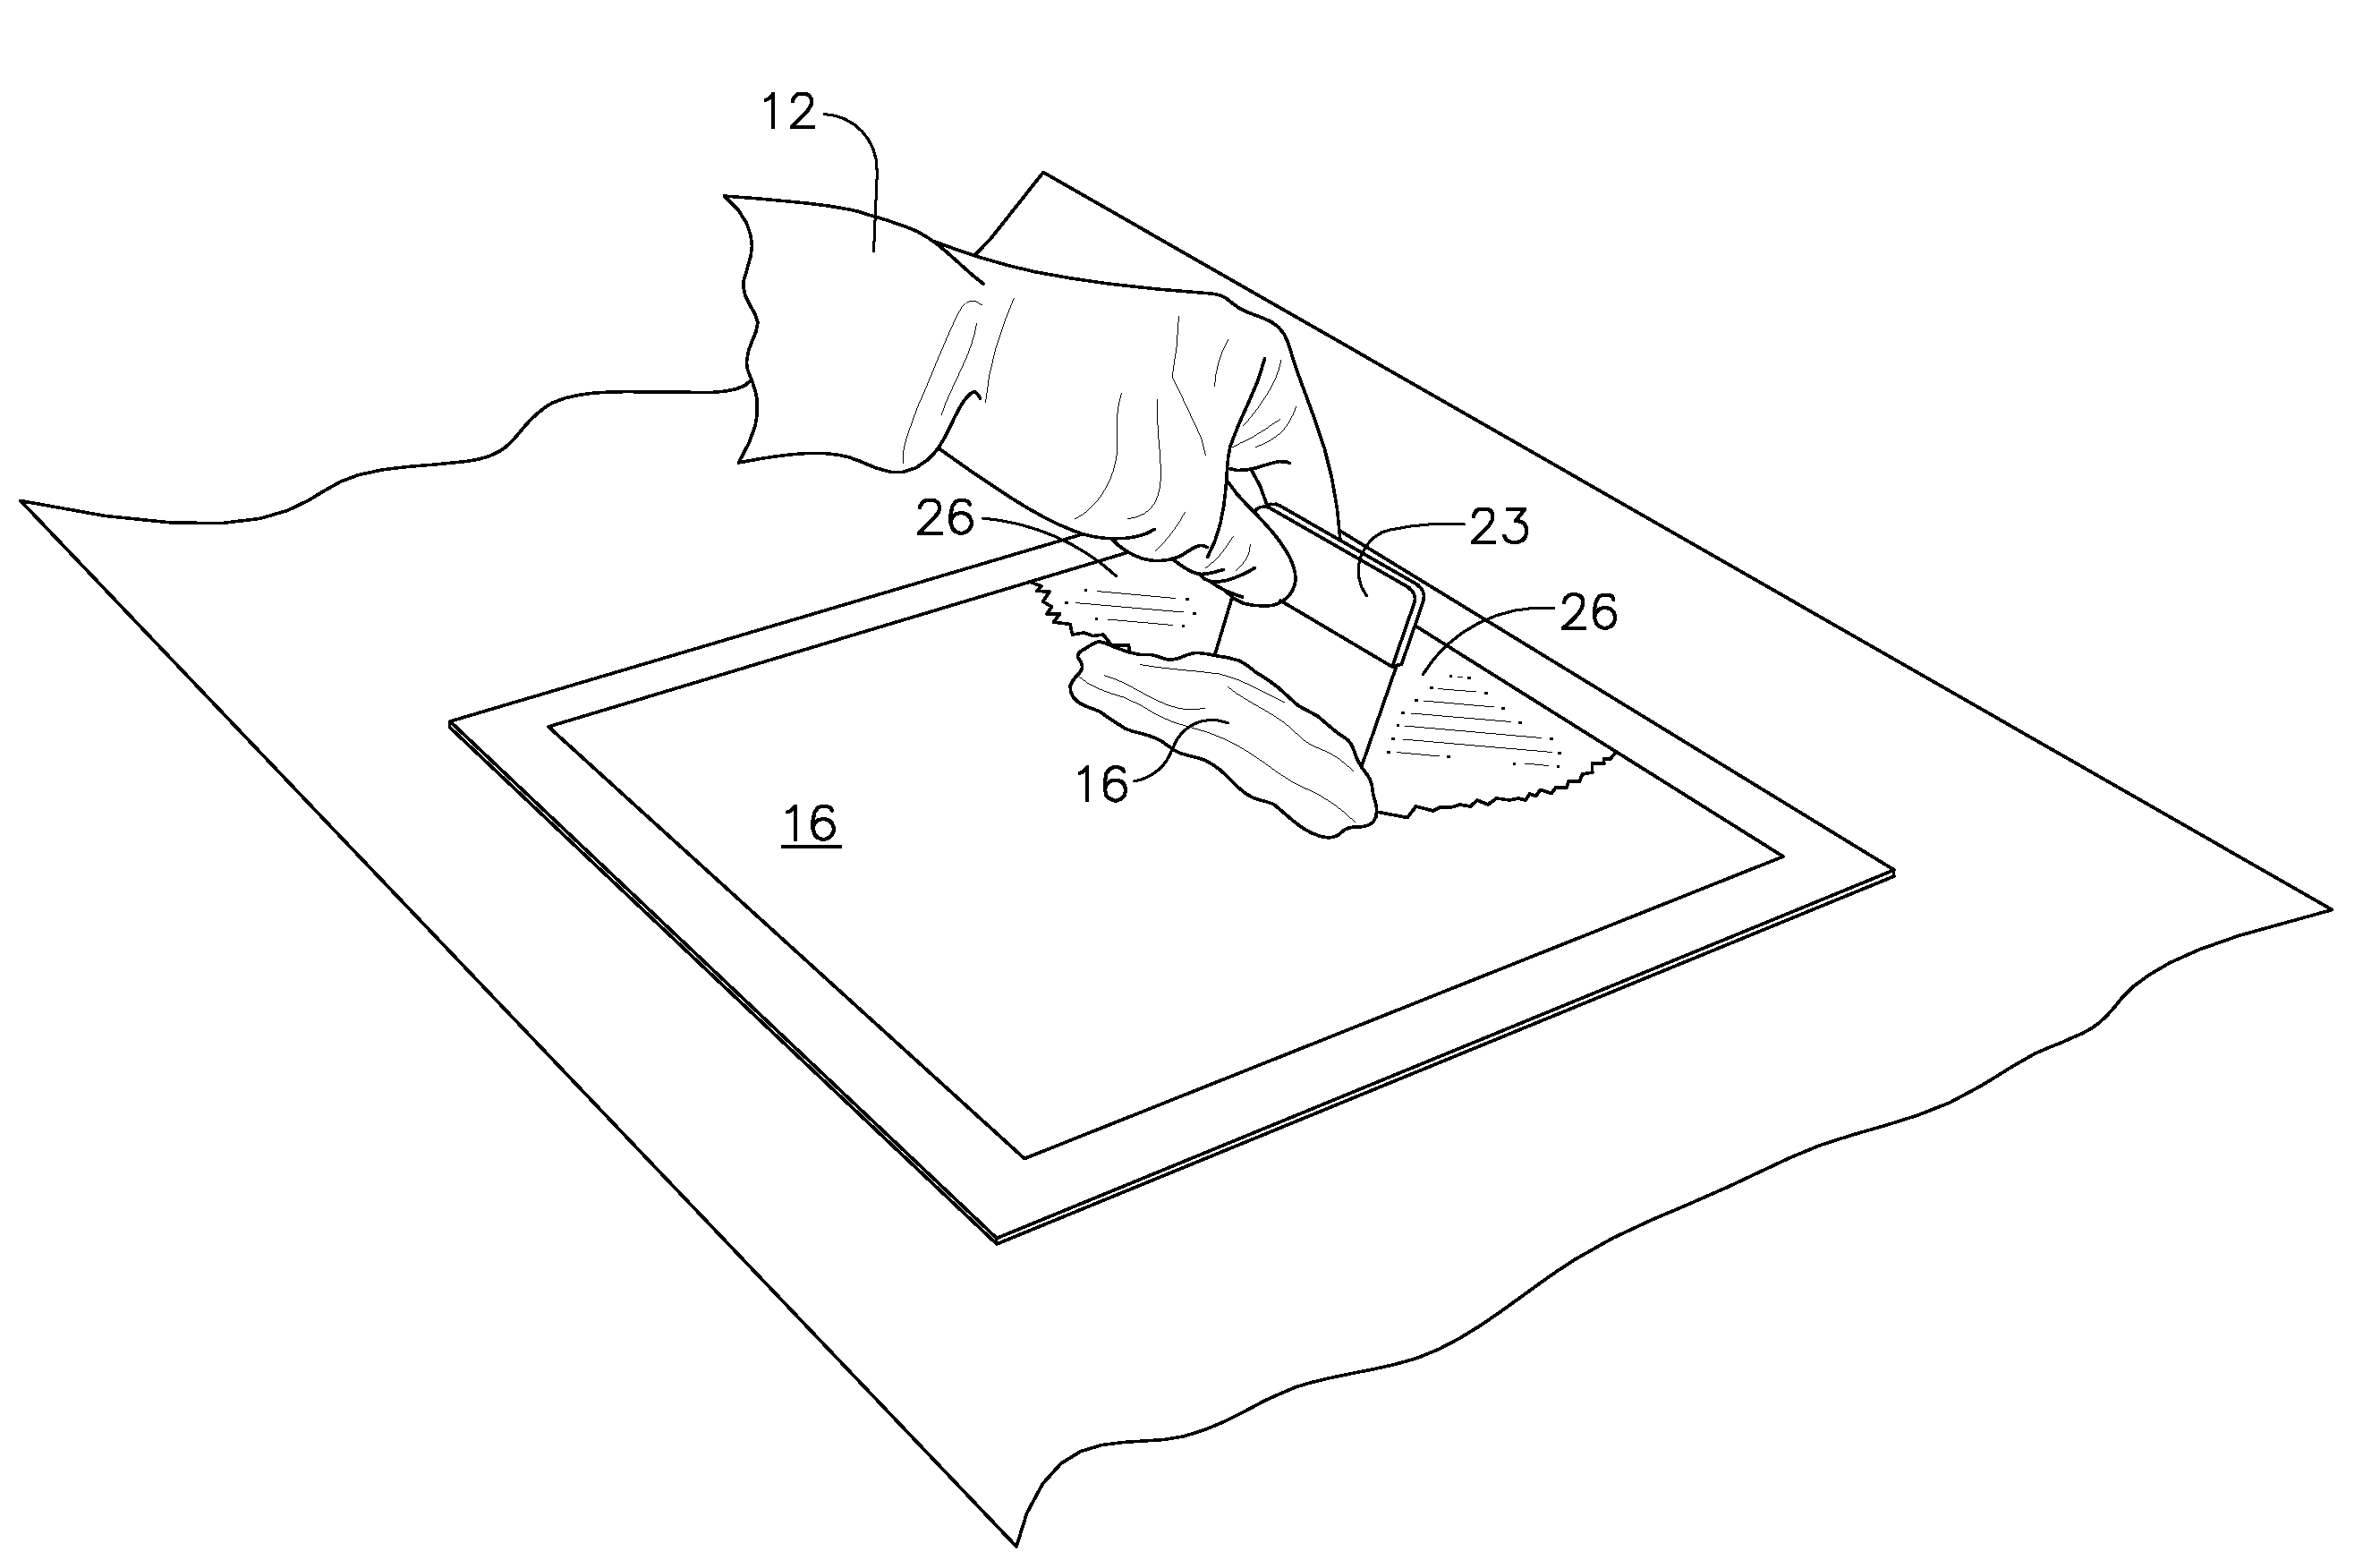 Gelled adhesive remover composition and method of use